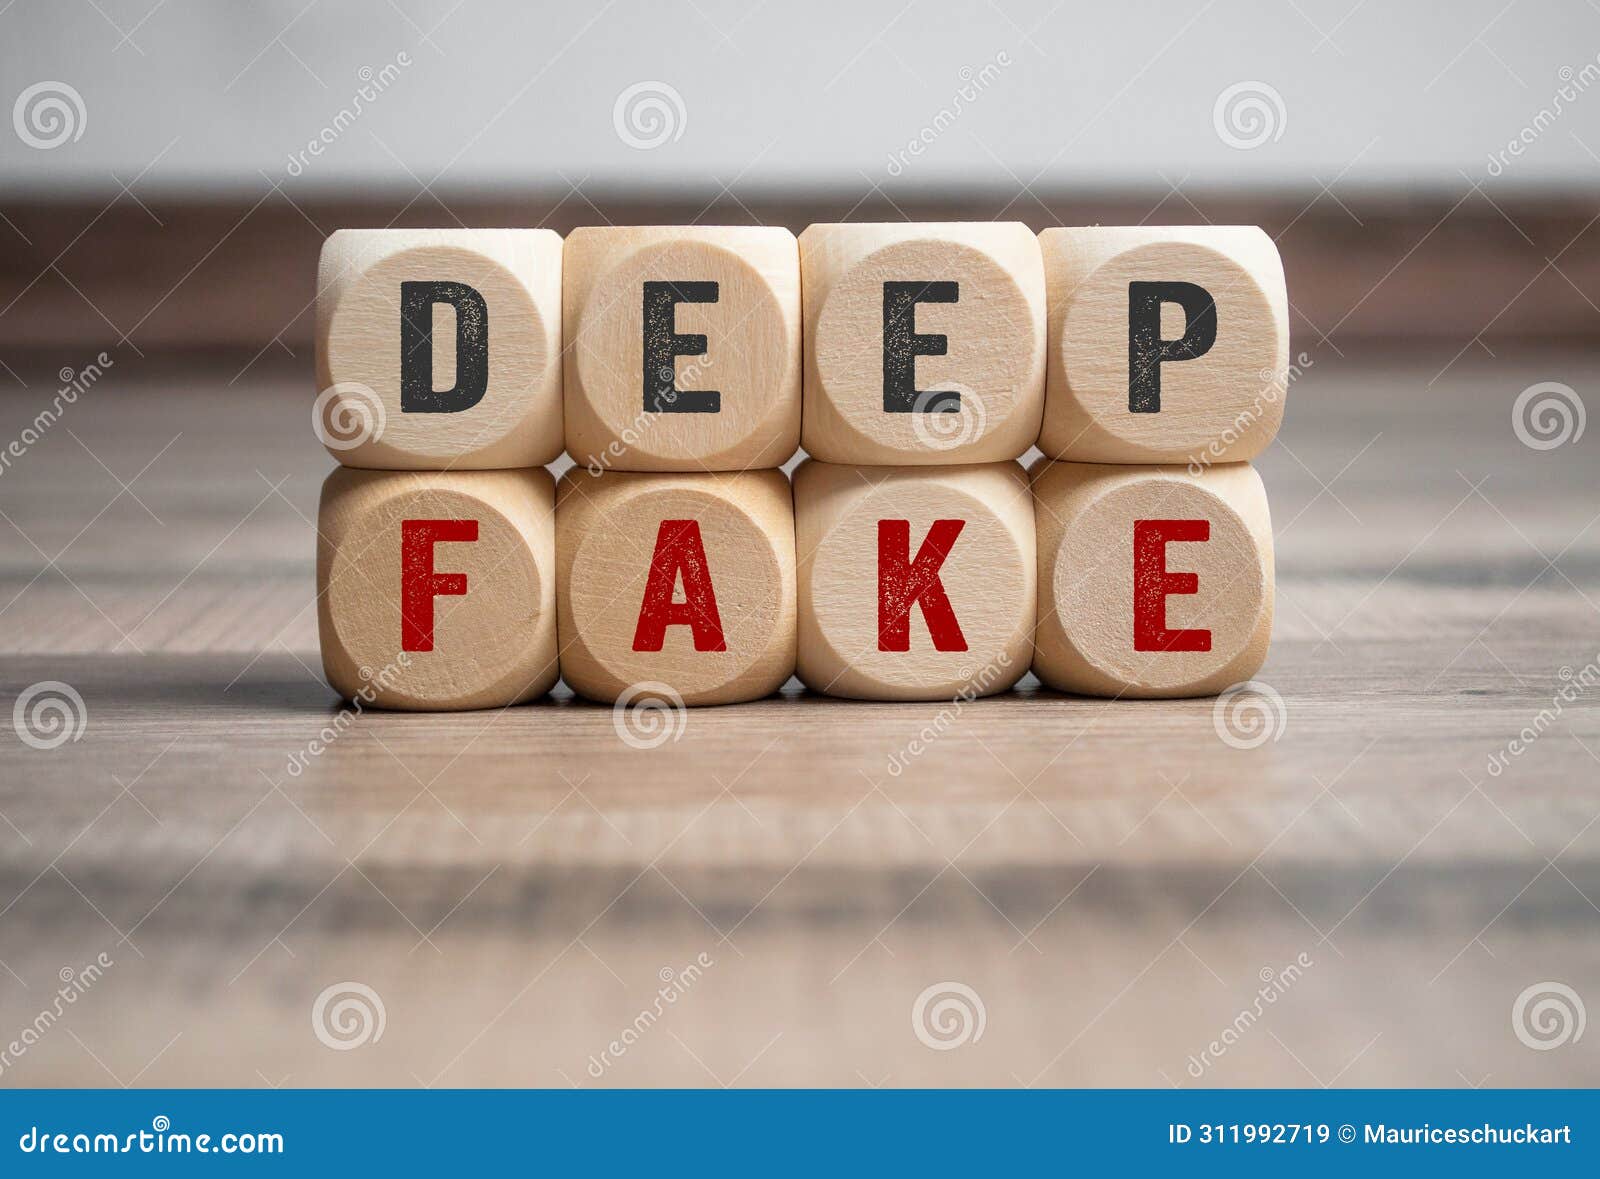 cubes, dice or blocks with deep fake, deepfake on wooden background